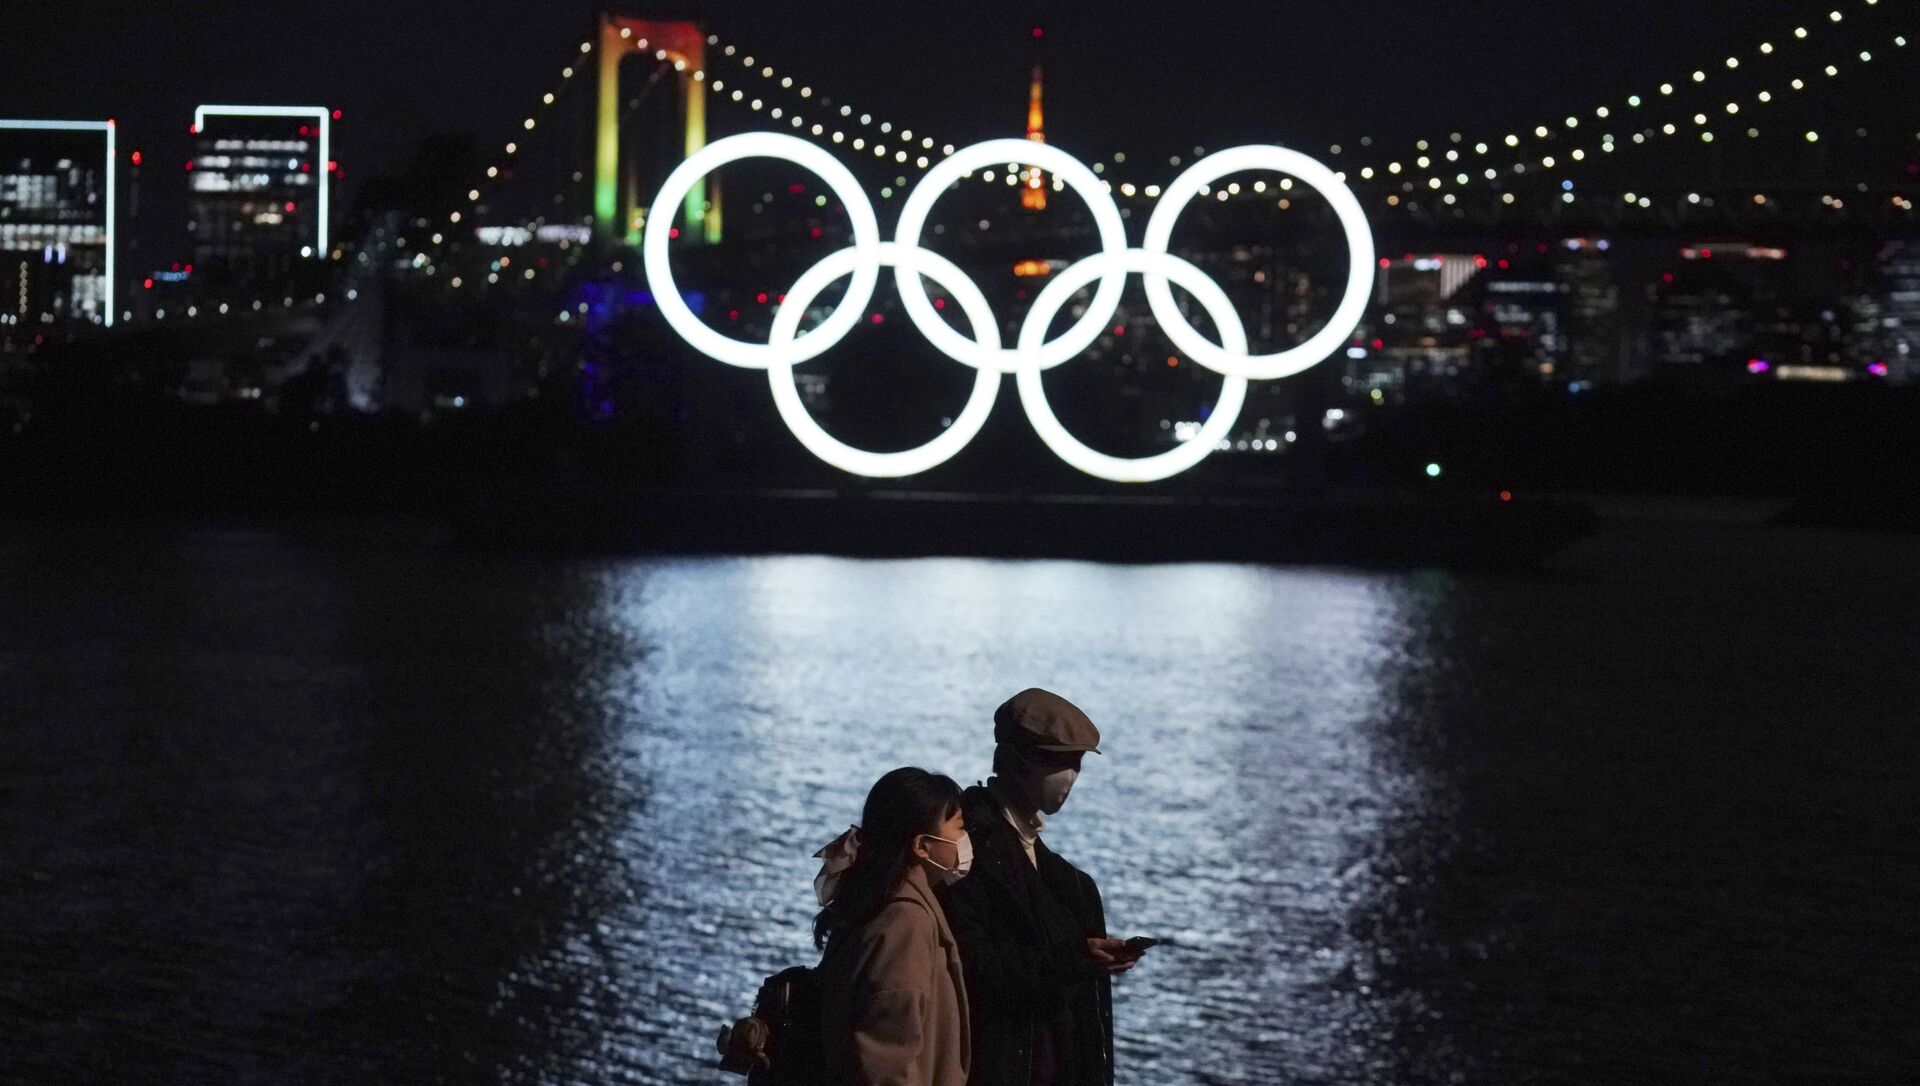 A man and woman walk past the Olympic rings floating in the water in the Odaiba (artificial island) section on Tuesday, 1 December 2020, in Tokyo. The Olympic Symbol was reinstated after it was taken down for maintenance ahead of the postponed Tokyo 2020 Olympics. - Sputnik International, 1920, 20.07.2021